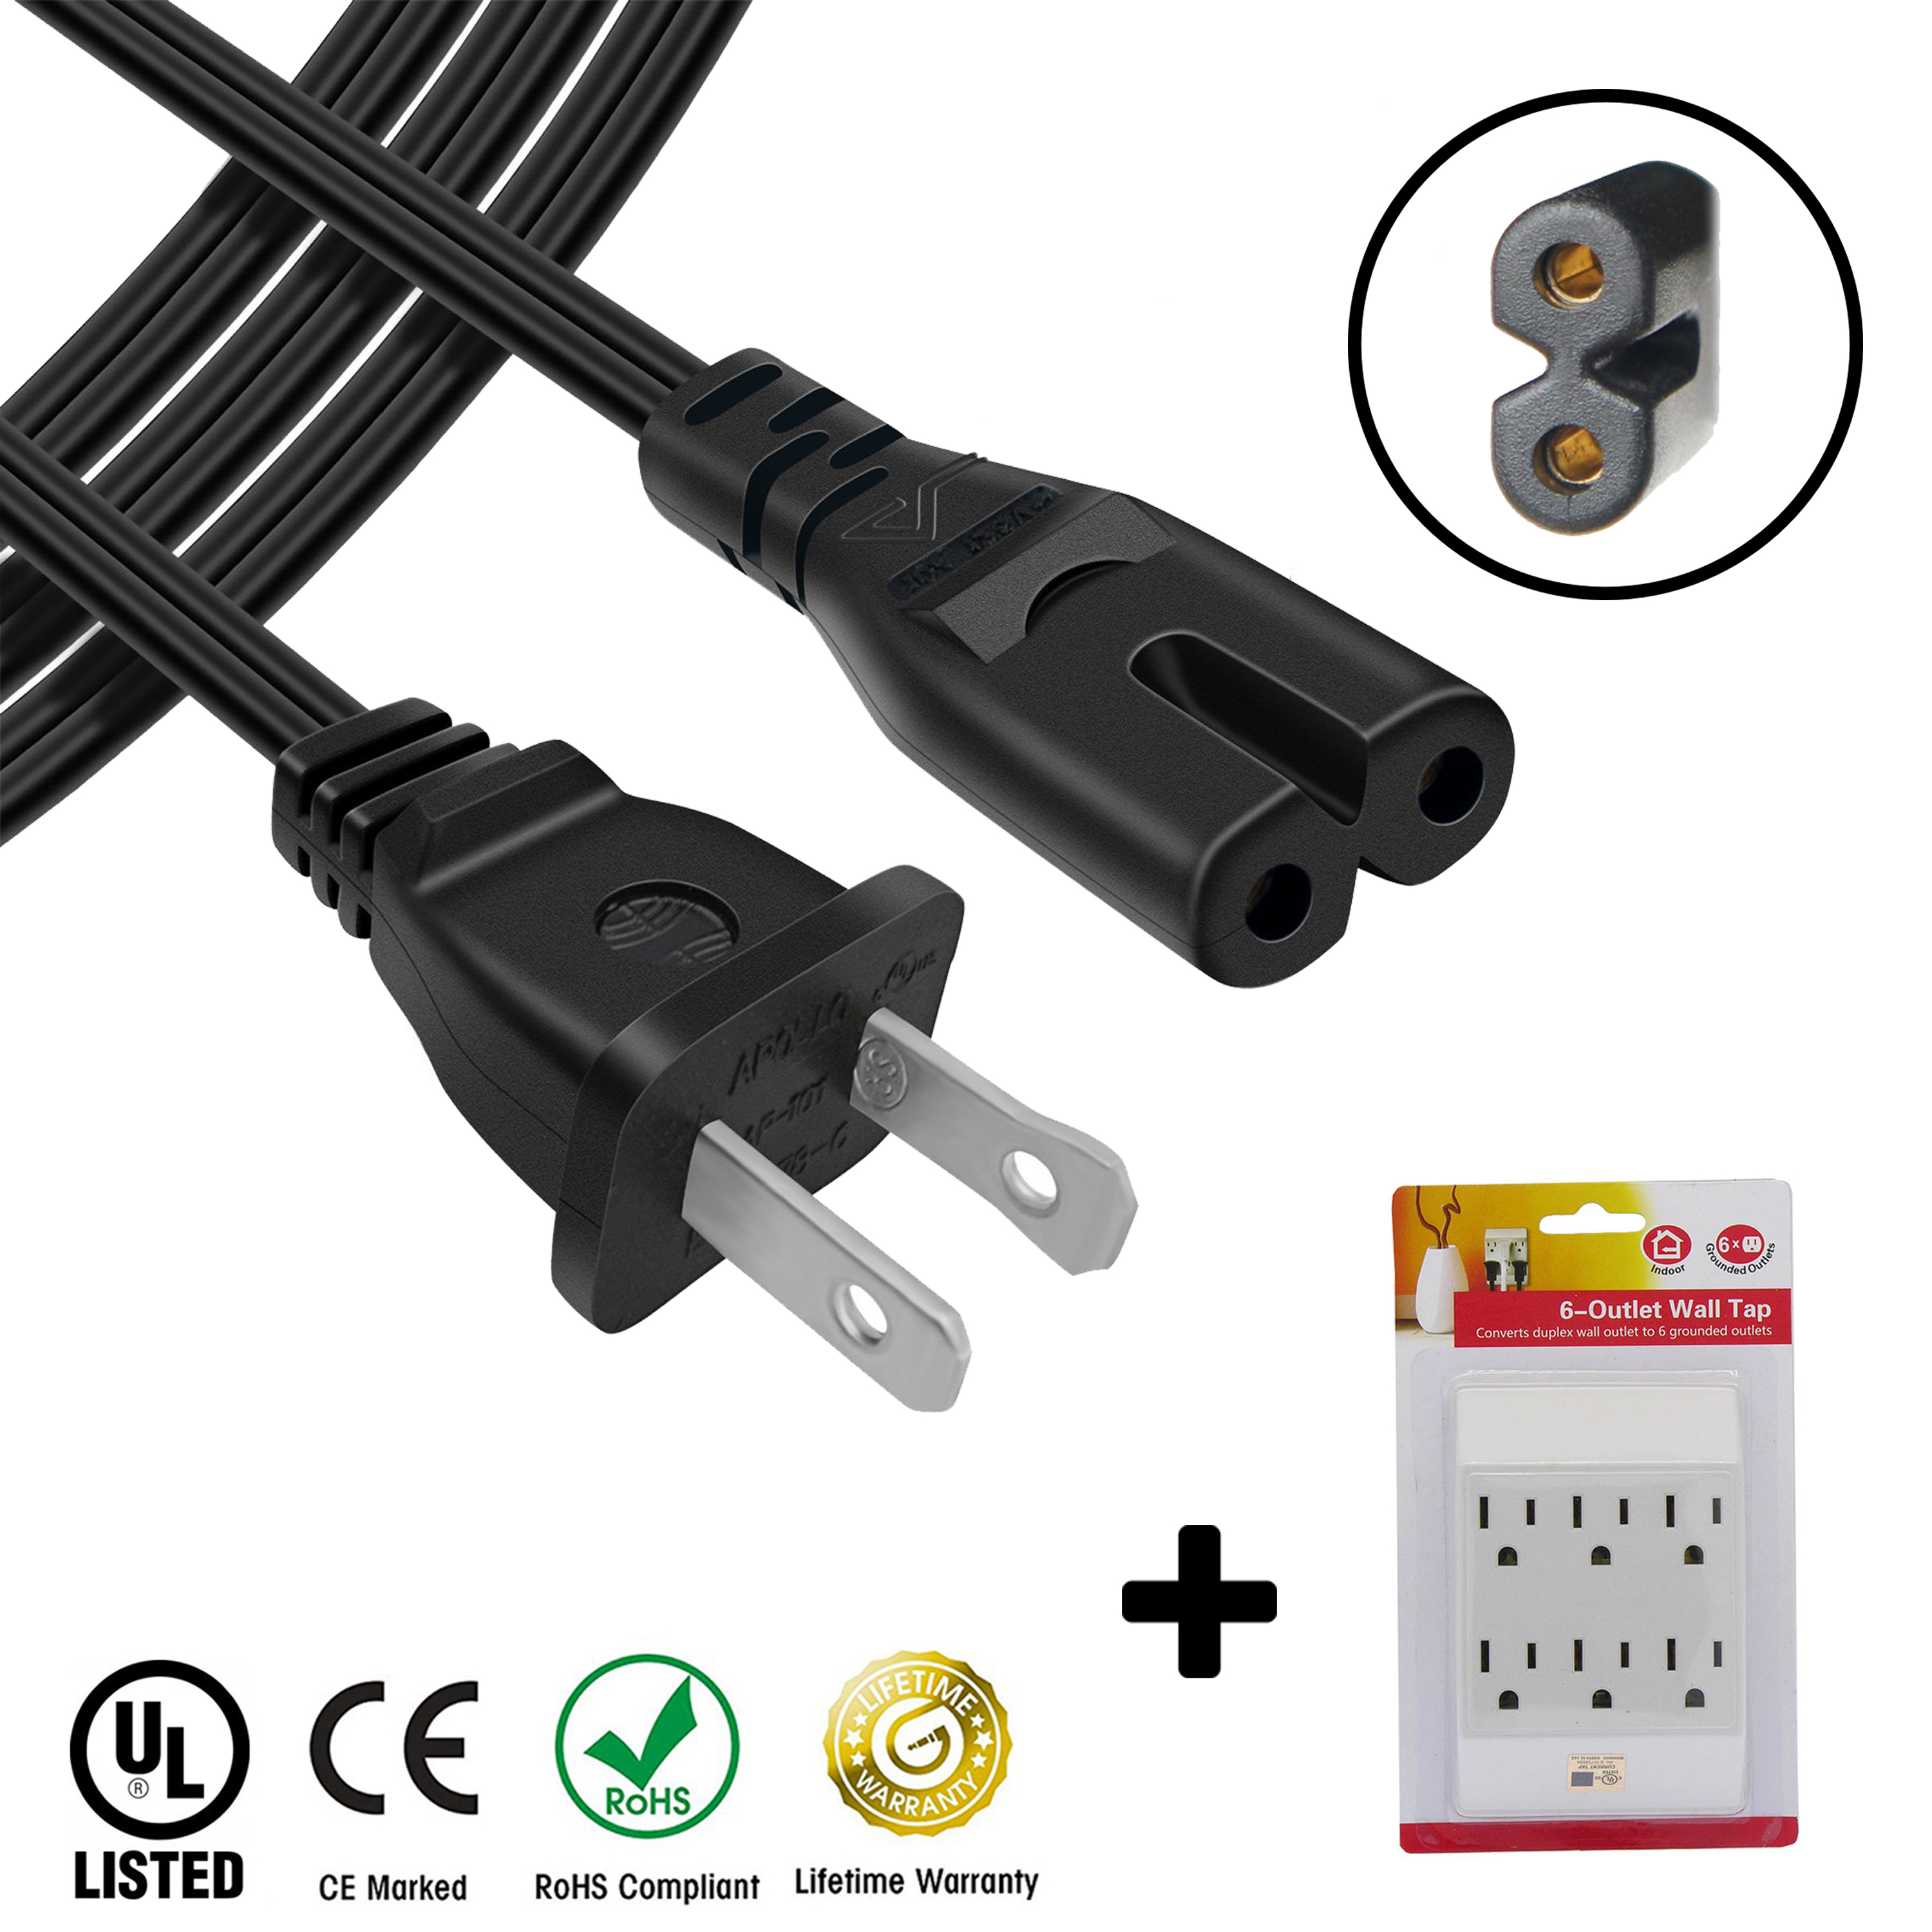 AC Power Cord 2 prong Figure 8 for Brother Janome Elna Pfaff Sewing Machine PLUS 6 Outlet Wall Tap - 8 ft - image 1 of 1